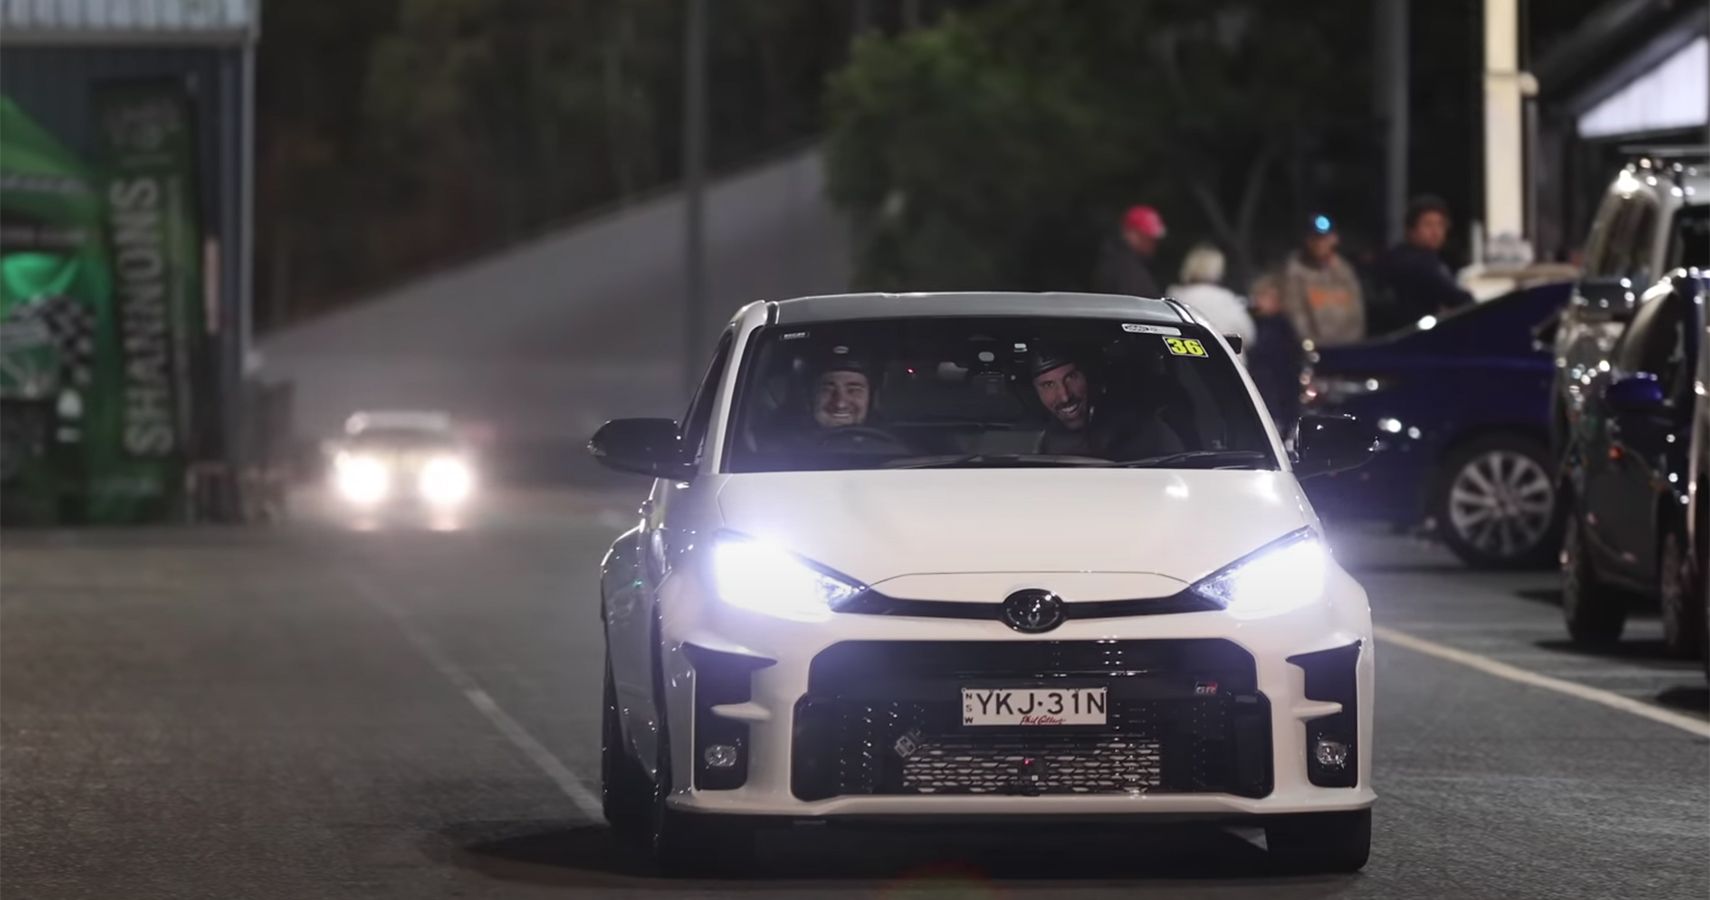 White Toyota GR Yaris at night, front view from distance on road